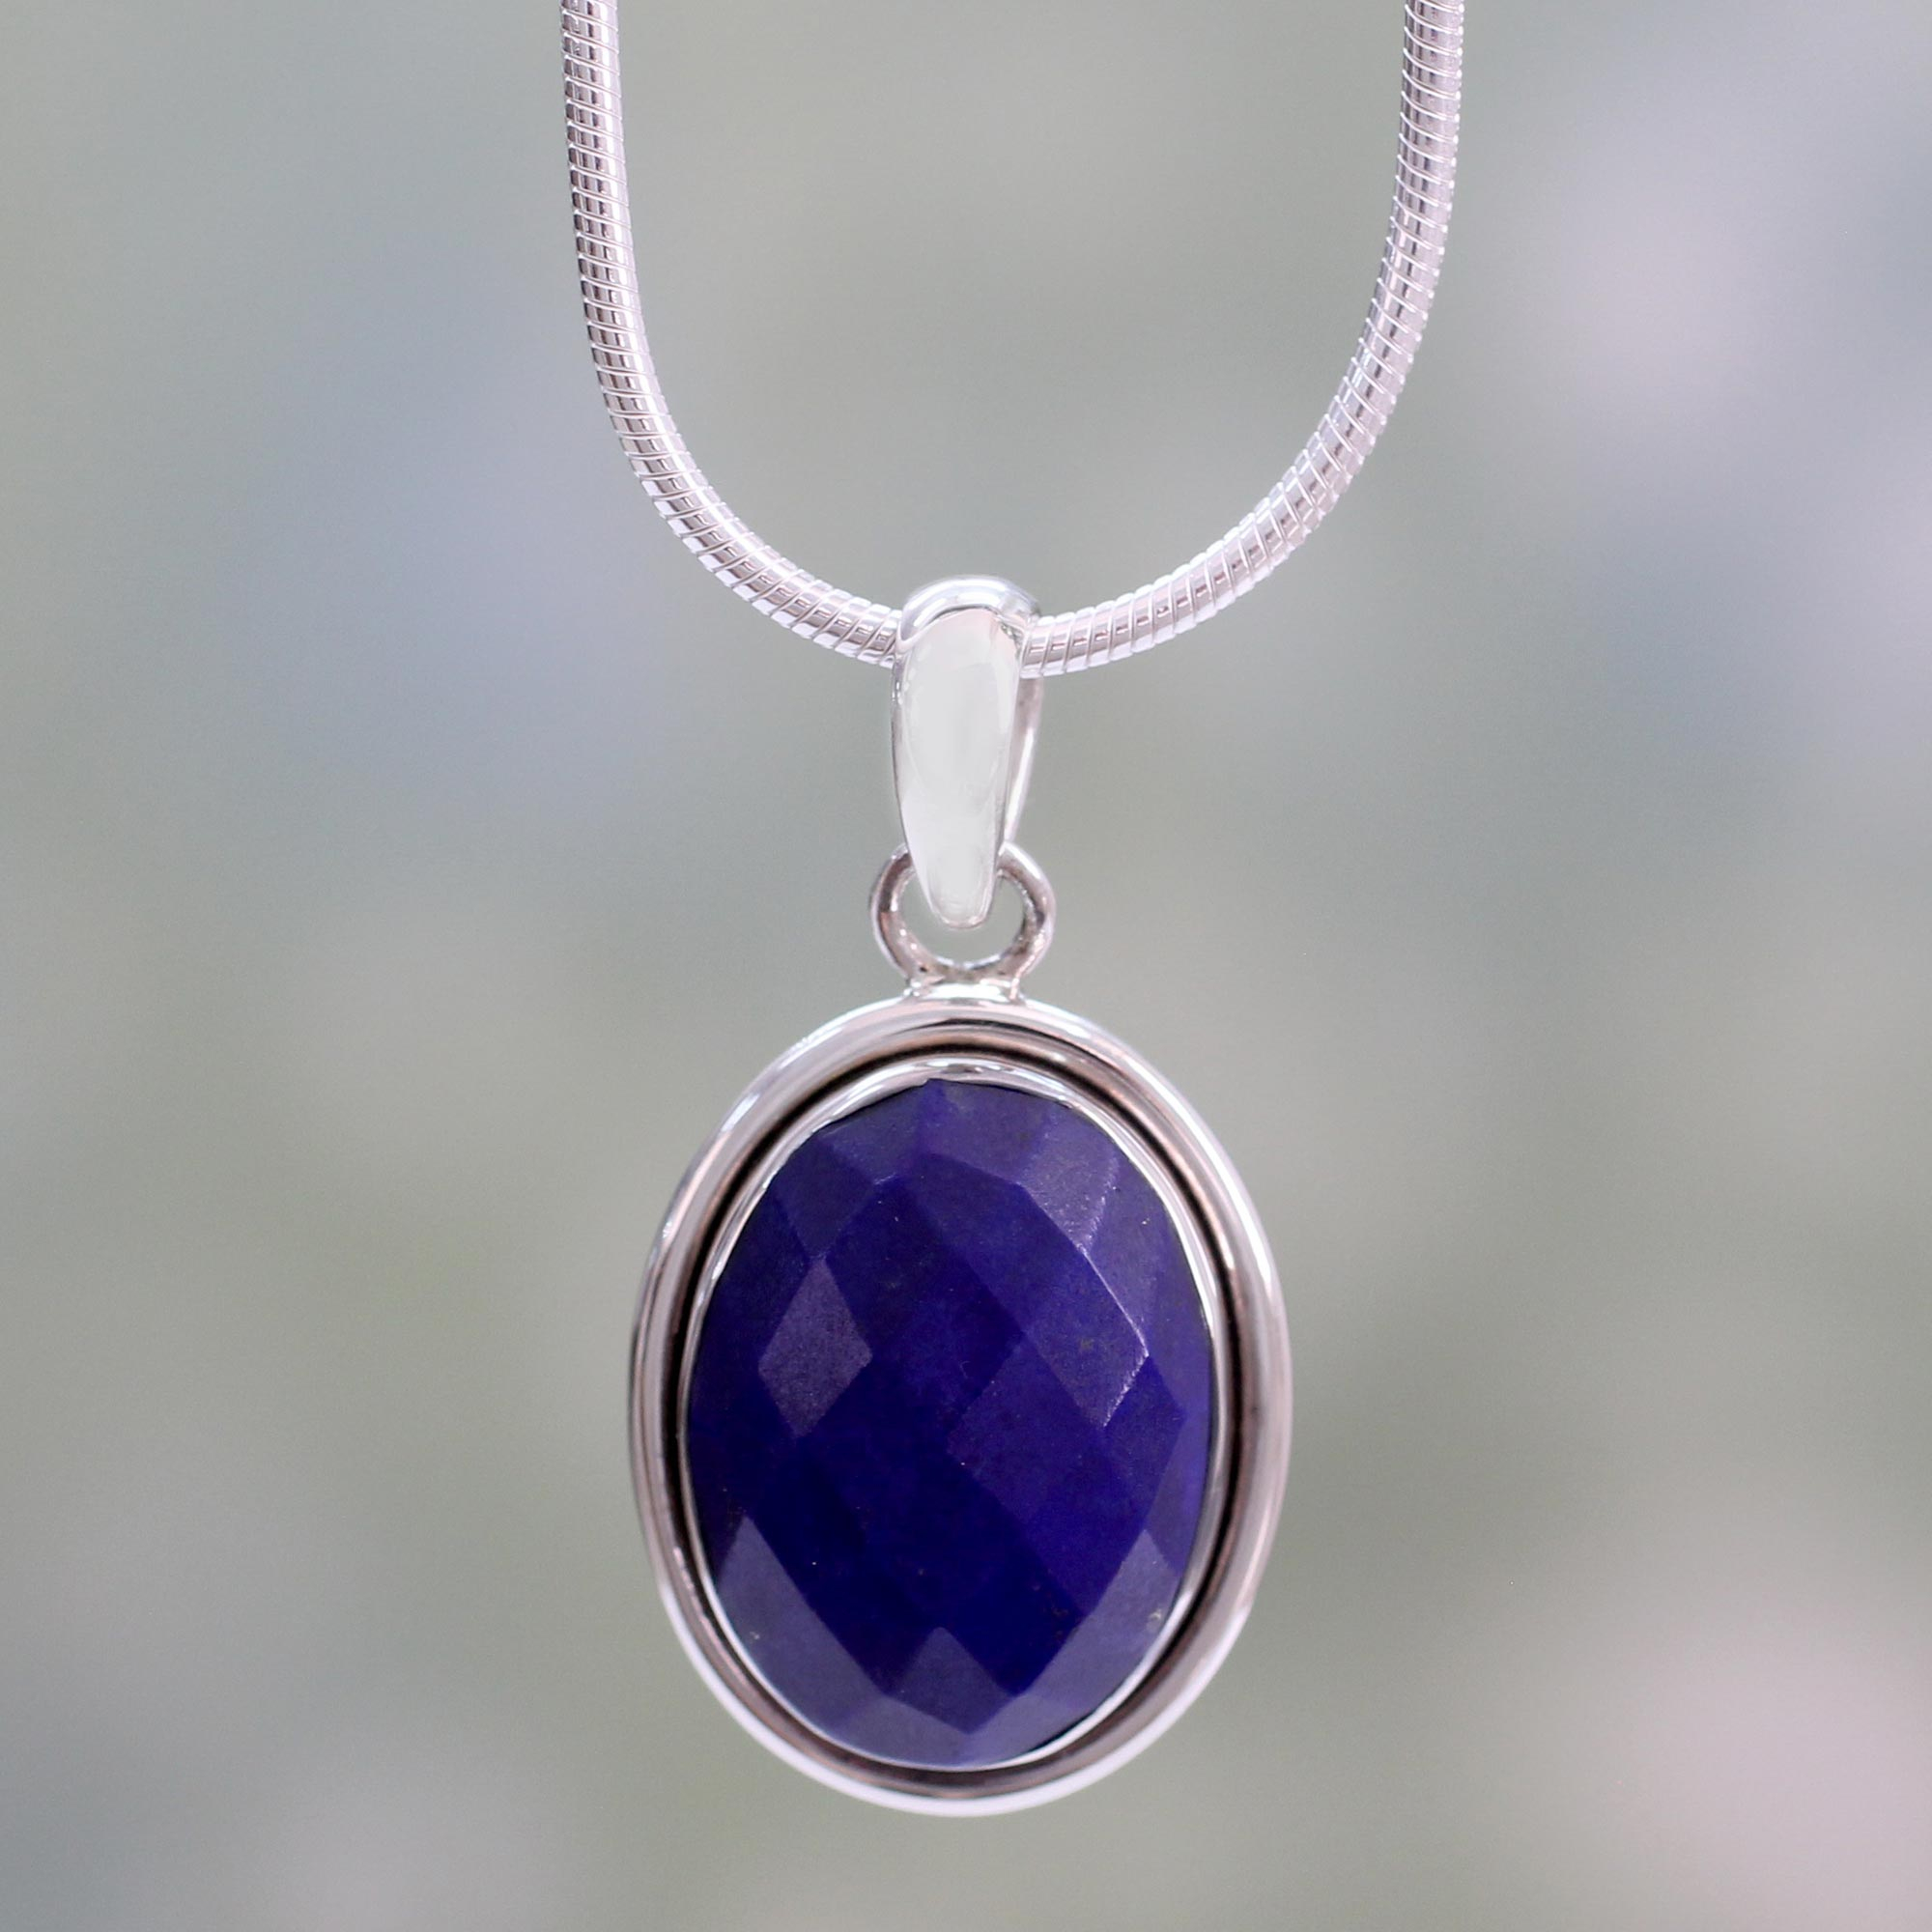 Fair Trade Jewelry Lapis Lazuli and Sterling Silver Necklace - Blue ...